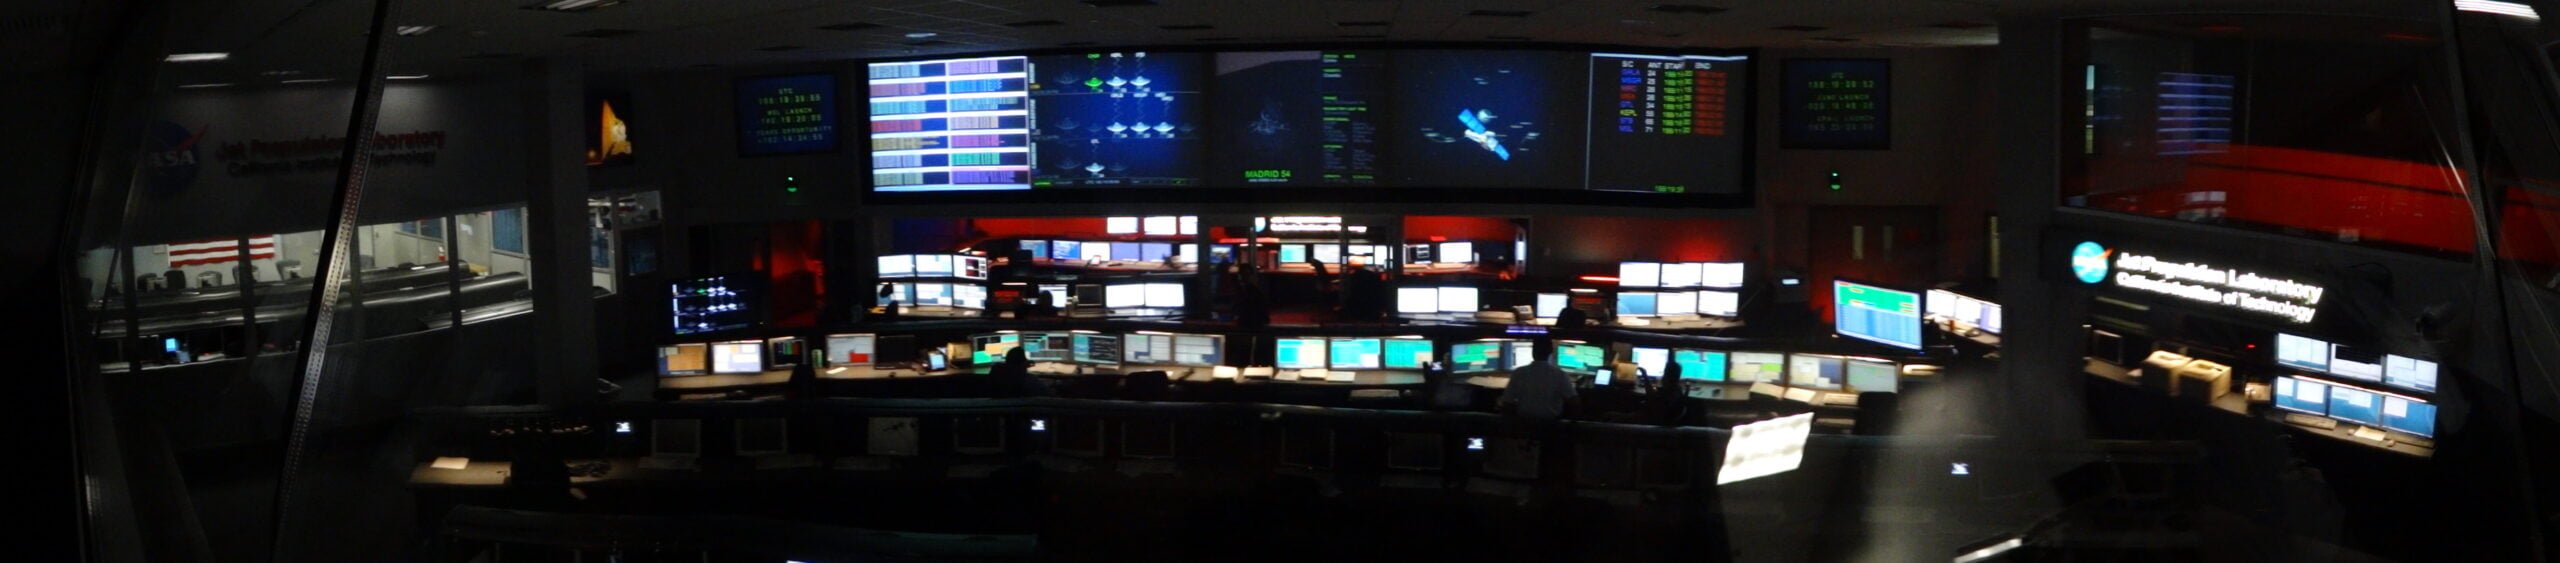 Computers and dashboards for space control office